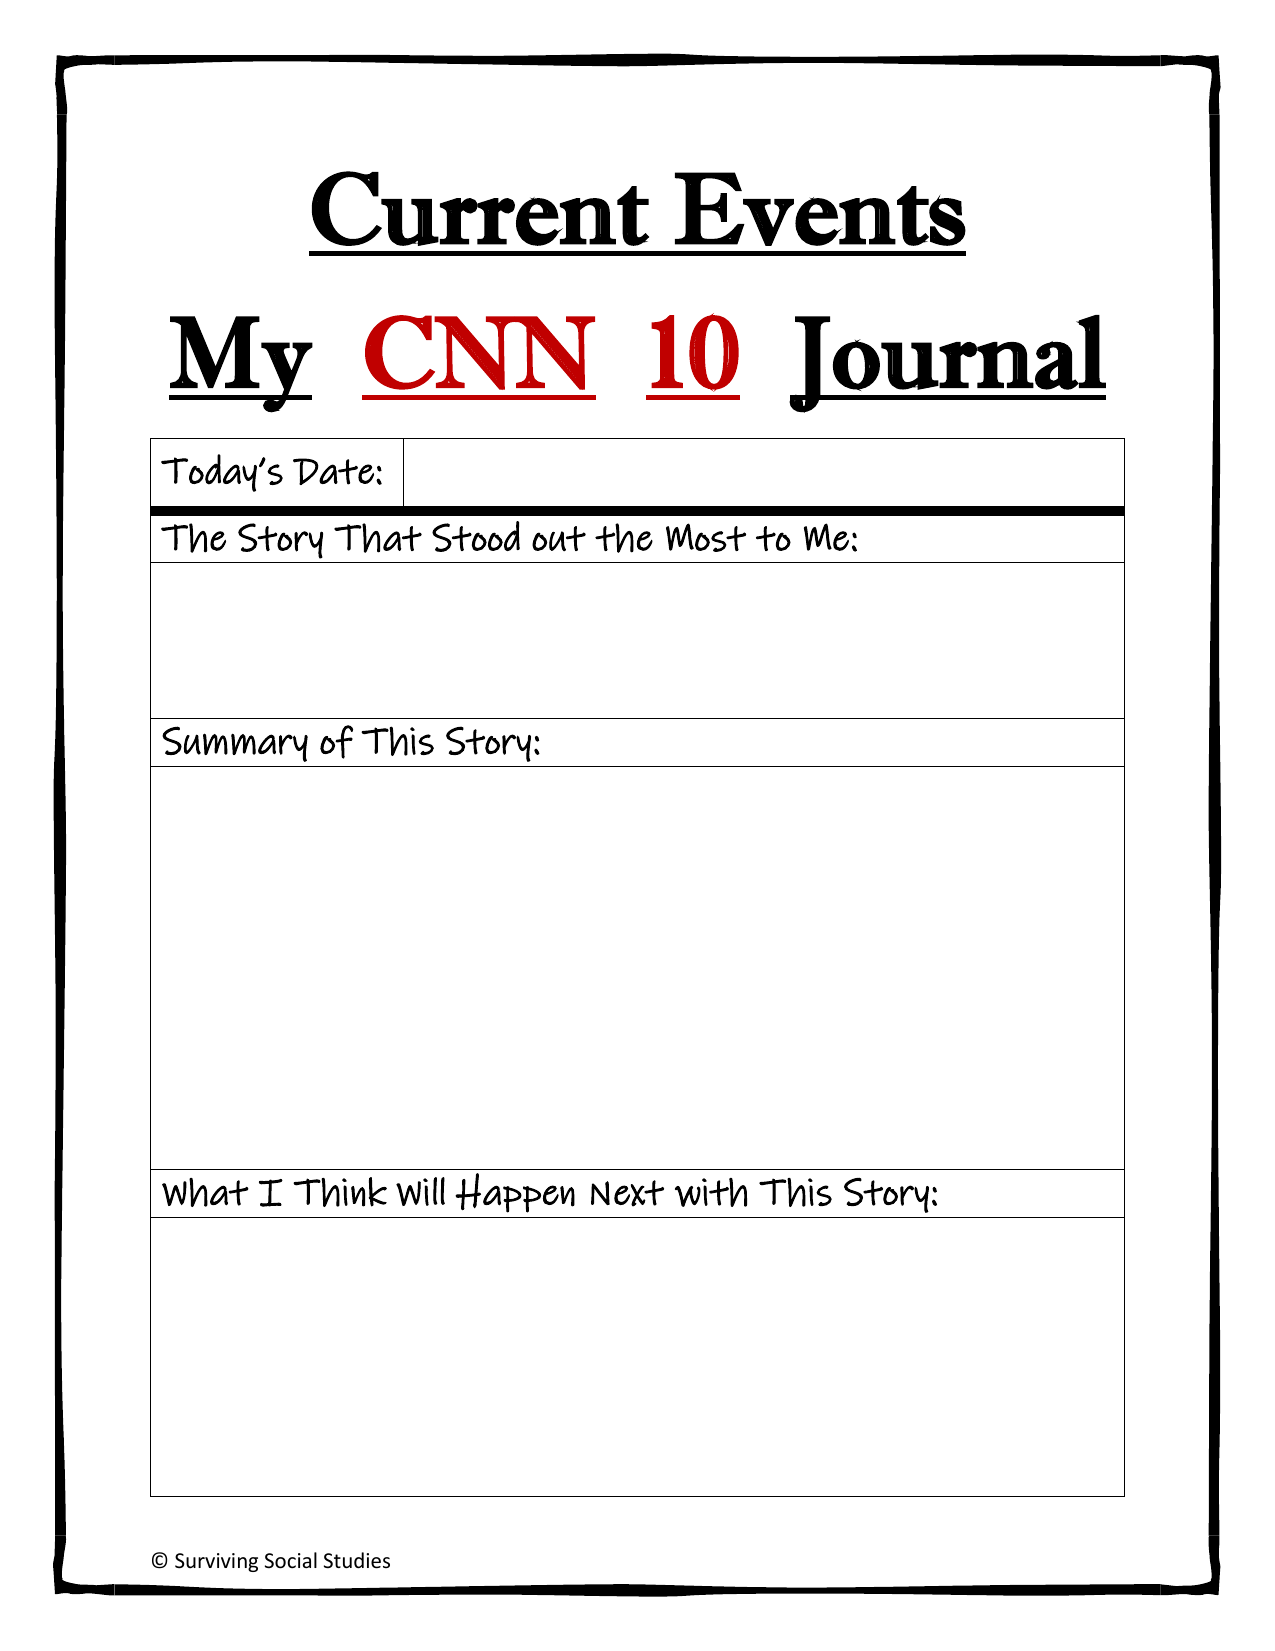 My CNN 20 Journal With Current Events Worksheet Pdf